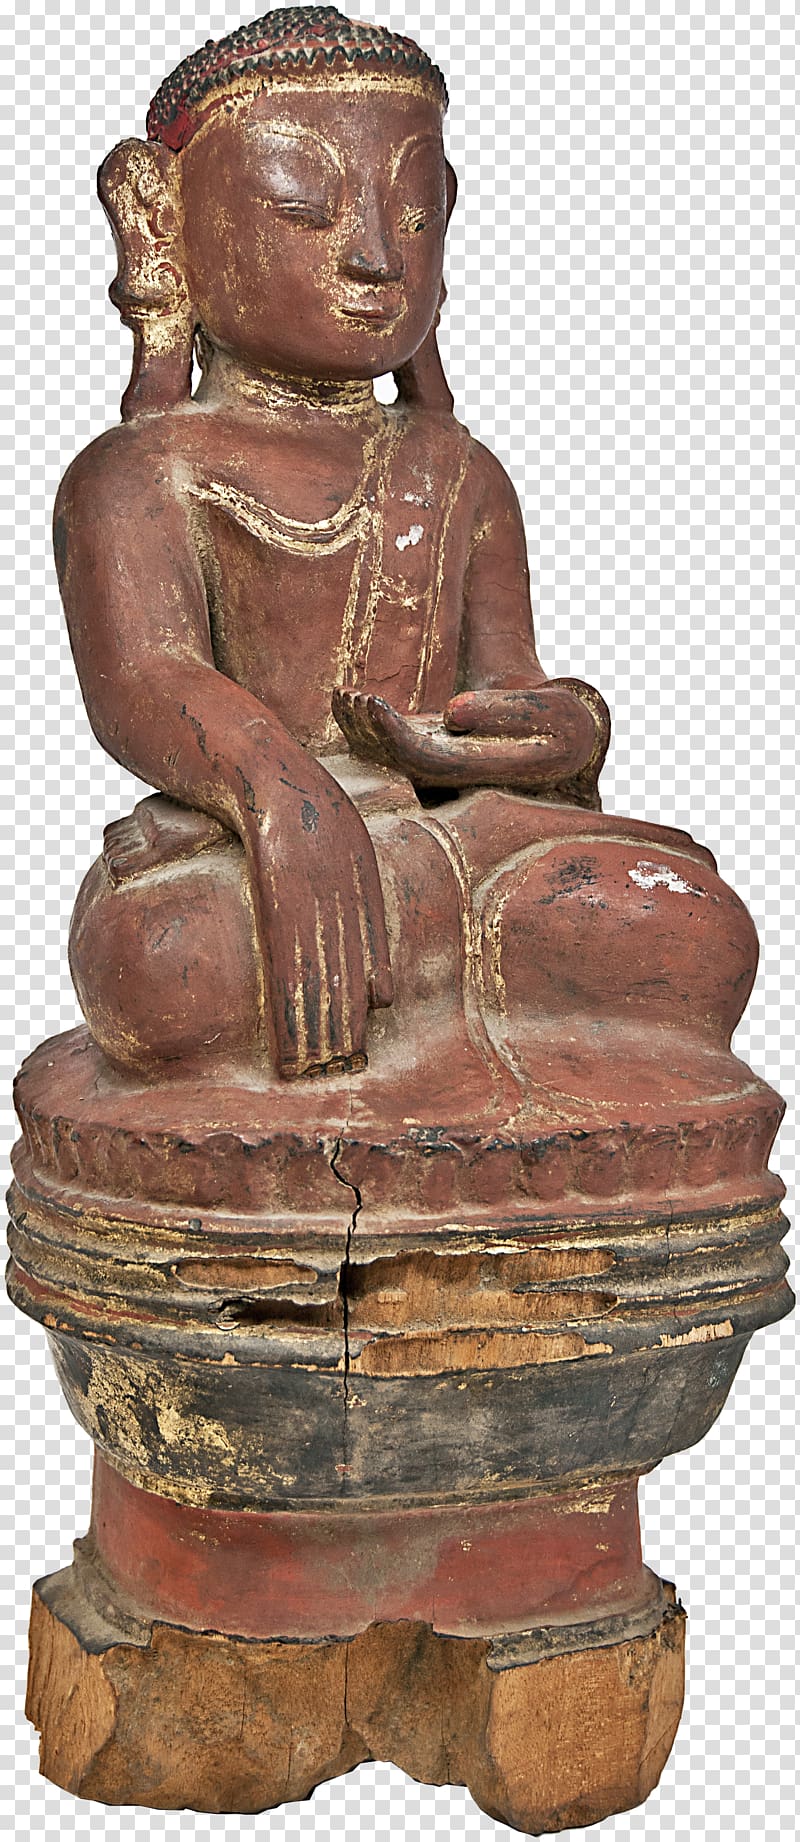 Classical sculpture Stone carving Figurine Ancient history, buddha transparent background PNG clipart